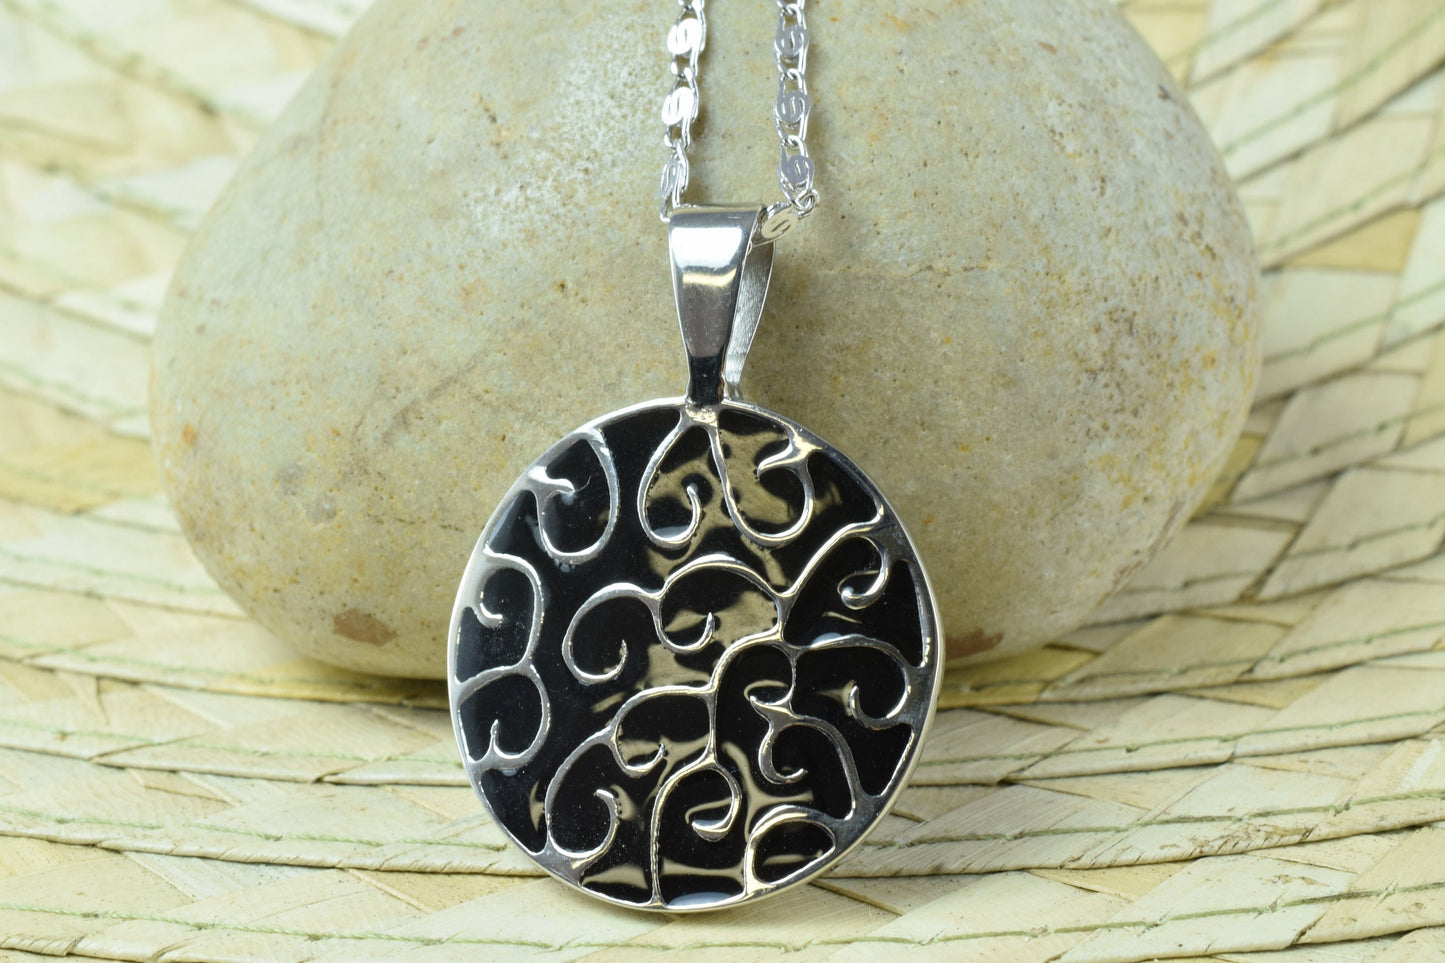 18K as Gold Filled* Black Irish Celtic Stainless Steel Pendant OR White as Gold Filled* Charm Size 36x26mm For Jewelry Making